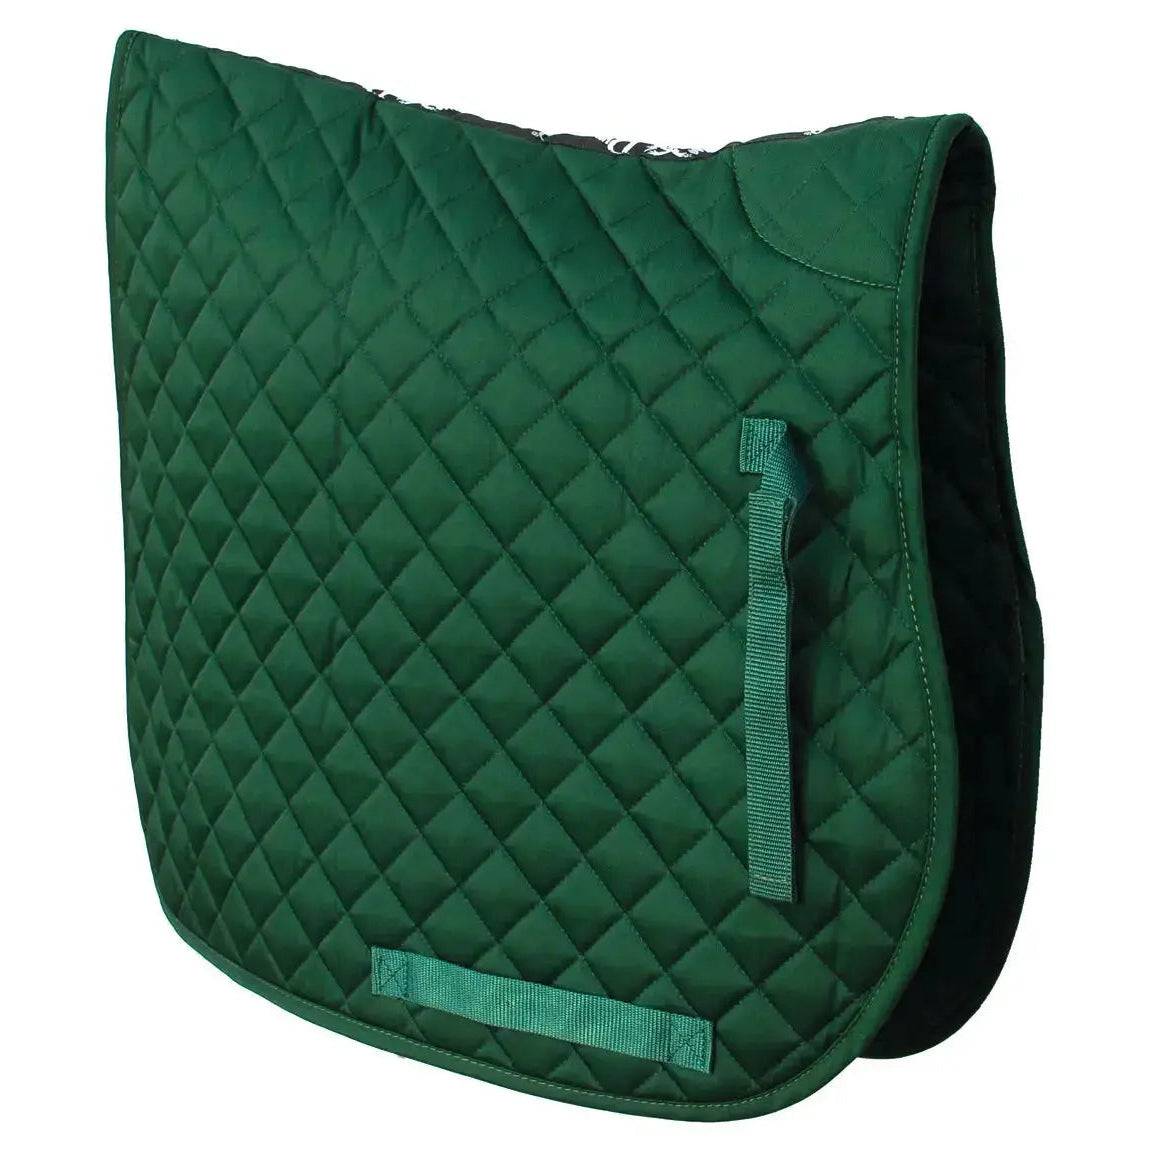 Rhinegold Quilted Cotton Saddle Pads Green Pony Rhinegold Saddle Pads & Numnahs Barnstaple Equestrian Supplies